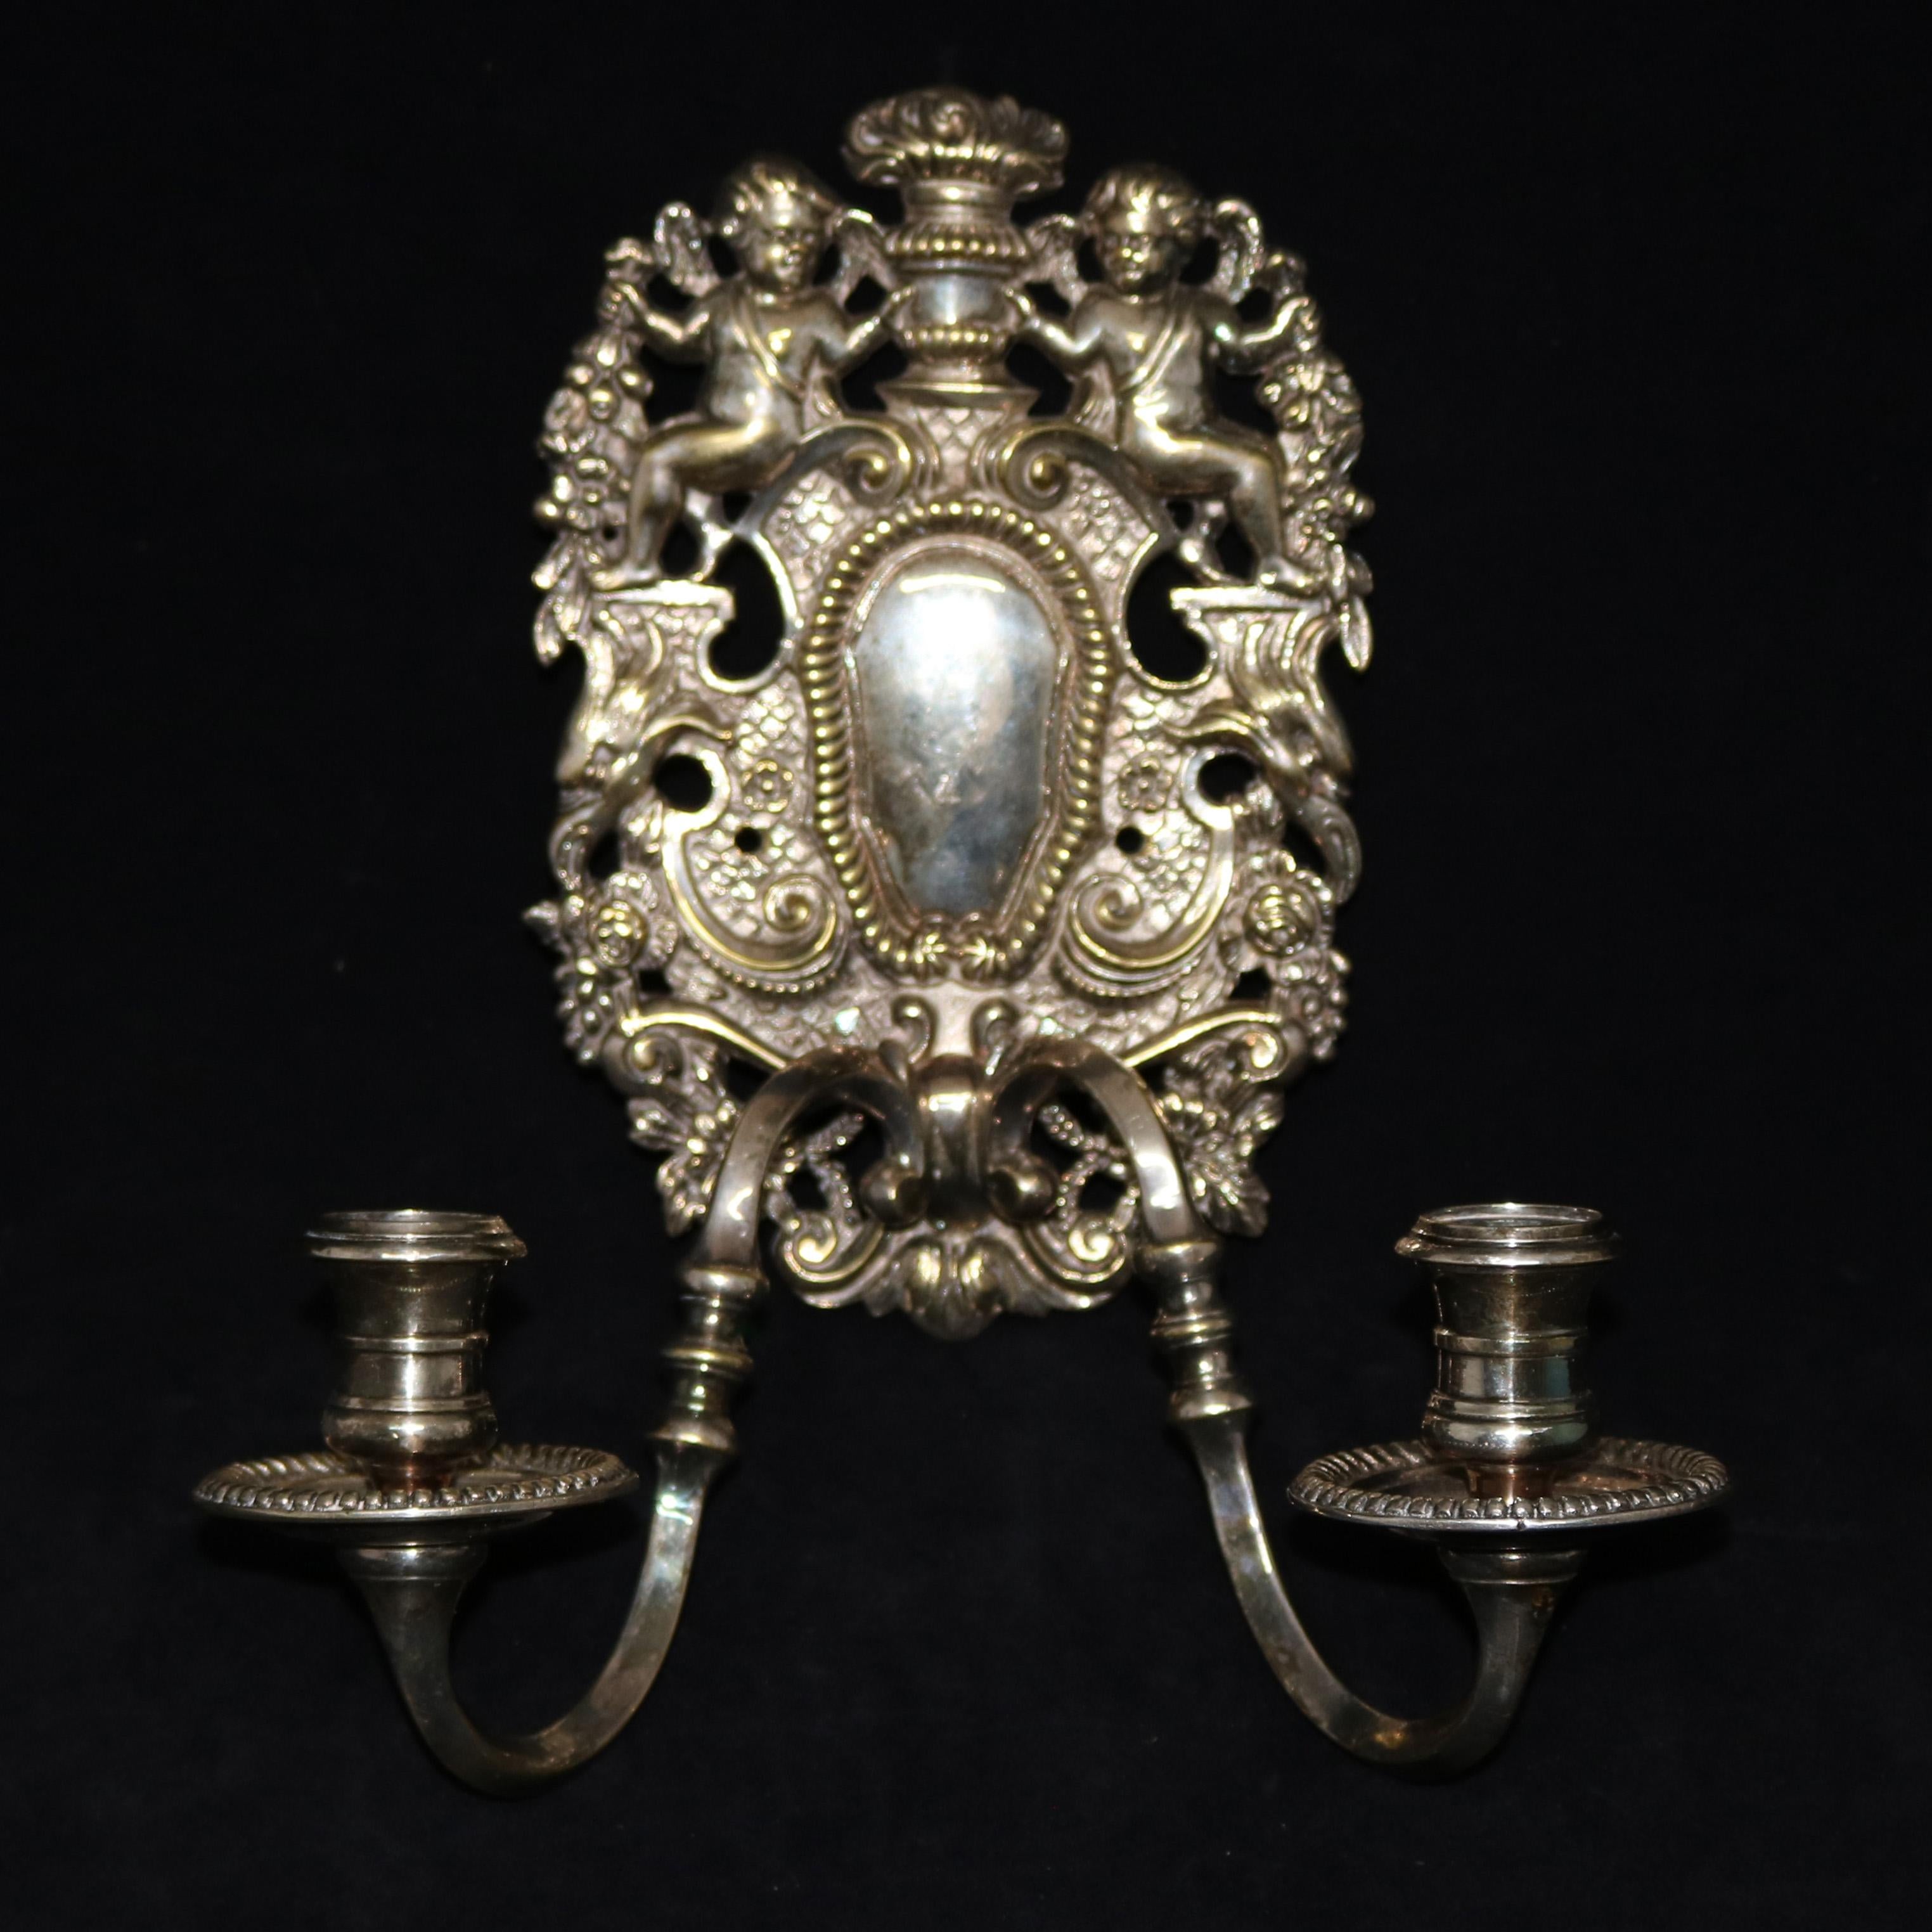 Classical Greek Pair of French Neoclassical Figural Cherub Gilt Metal Candle Wall Sconces